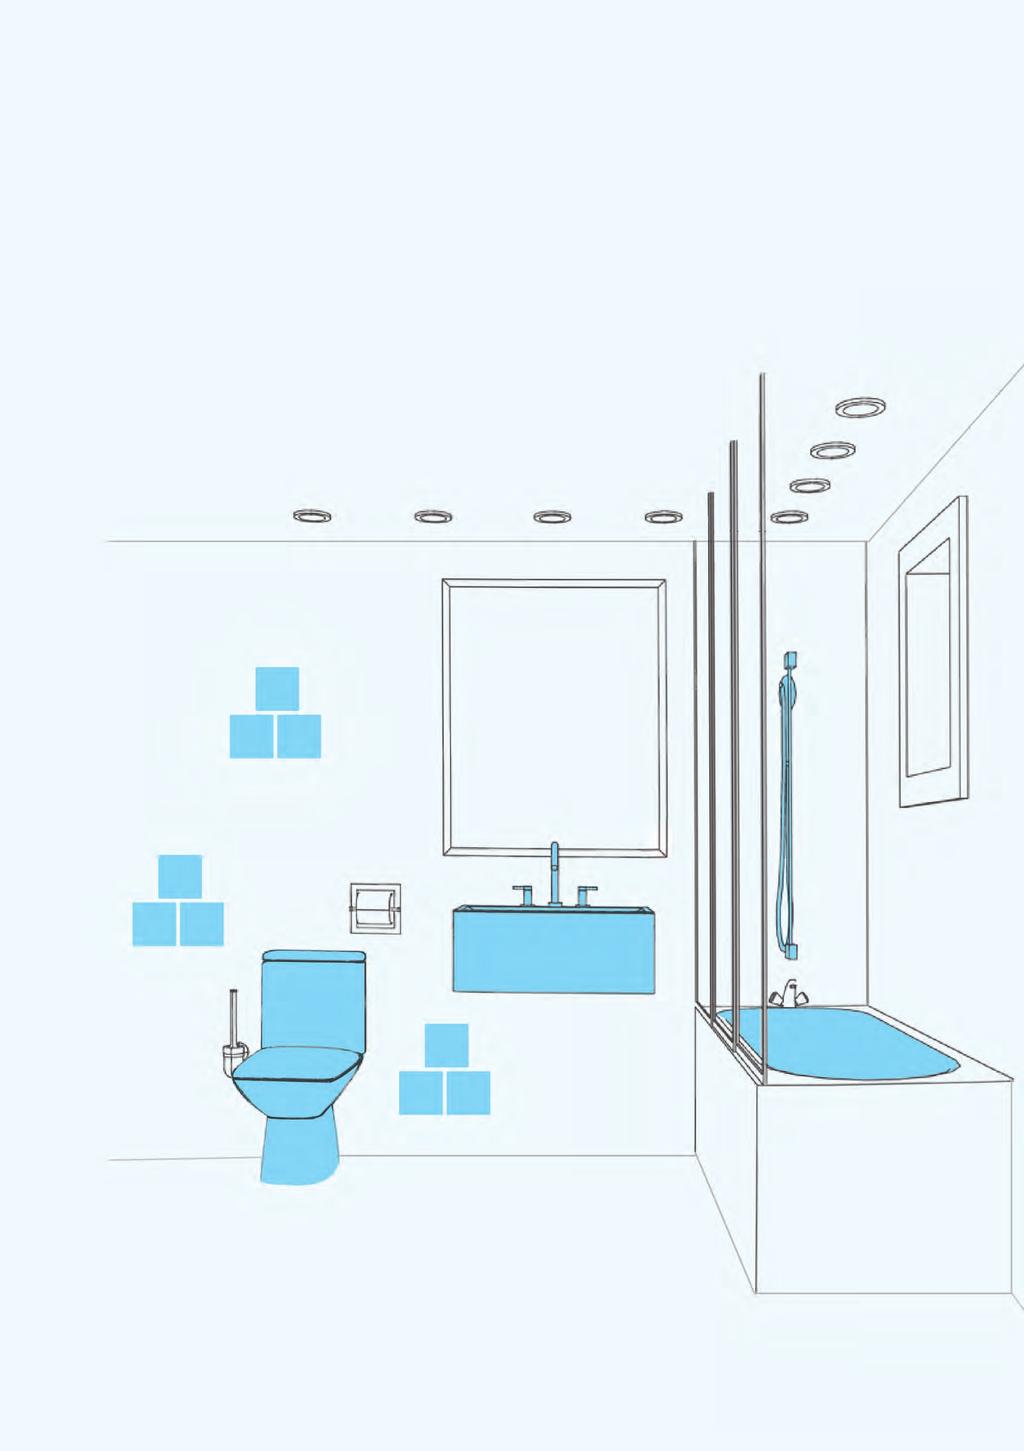 The Bathroom Tiles Clean wall tiles with a regular solution of soda crystals or use Liquid Soda Crystals to leave them clean and sparkling.